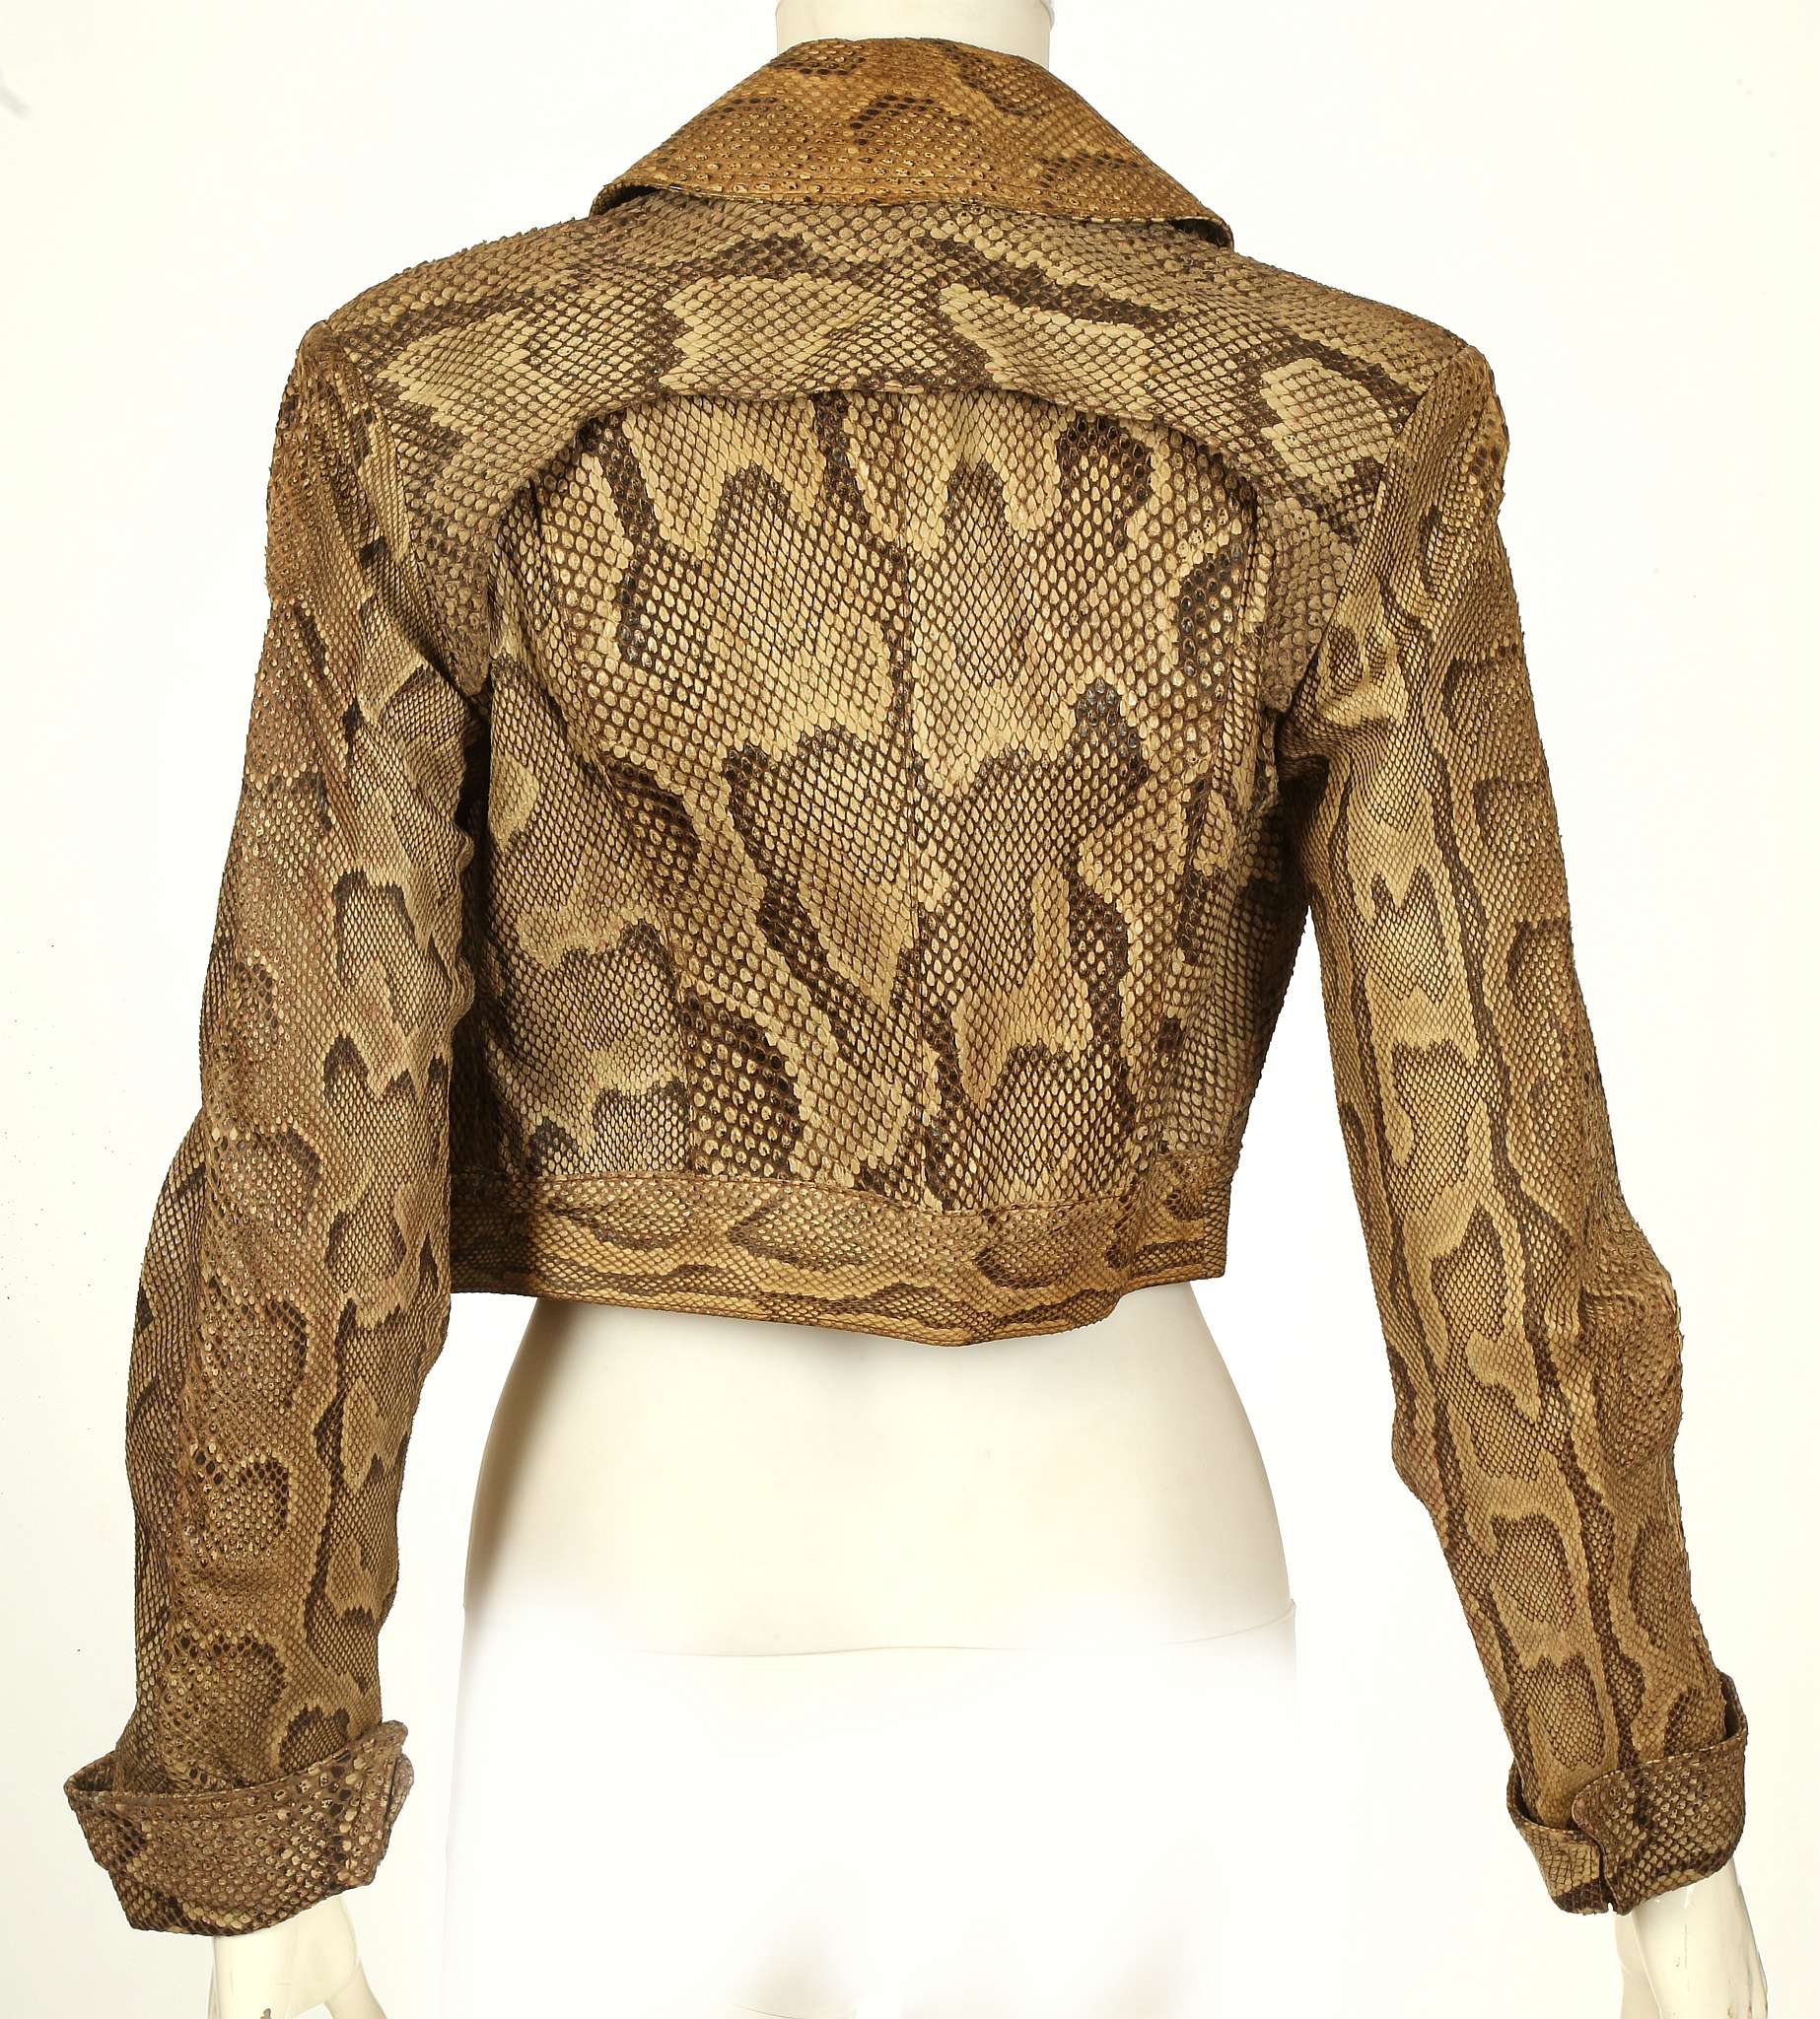 OSSIE CLARK PYTHON SKIN JACKET, late 1960s, waist length and double breasted with full lapels and - Image 5 of 8